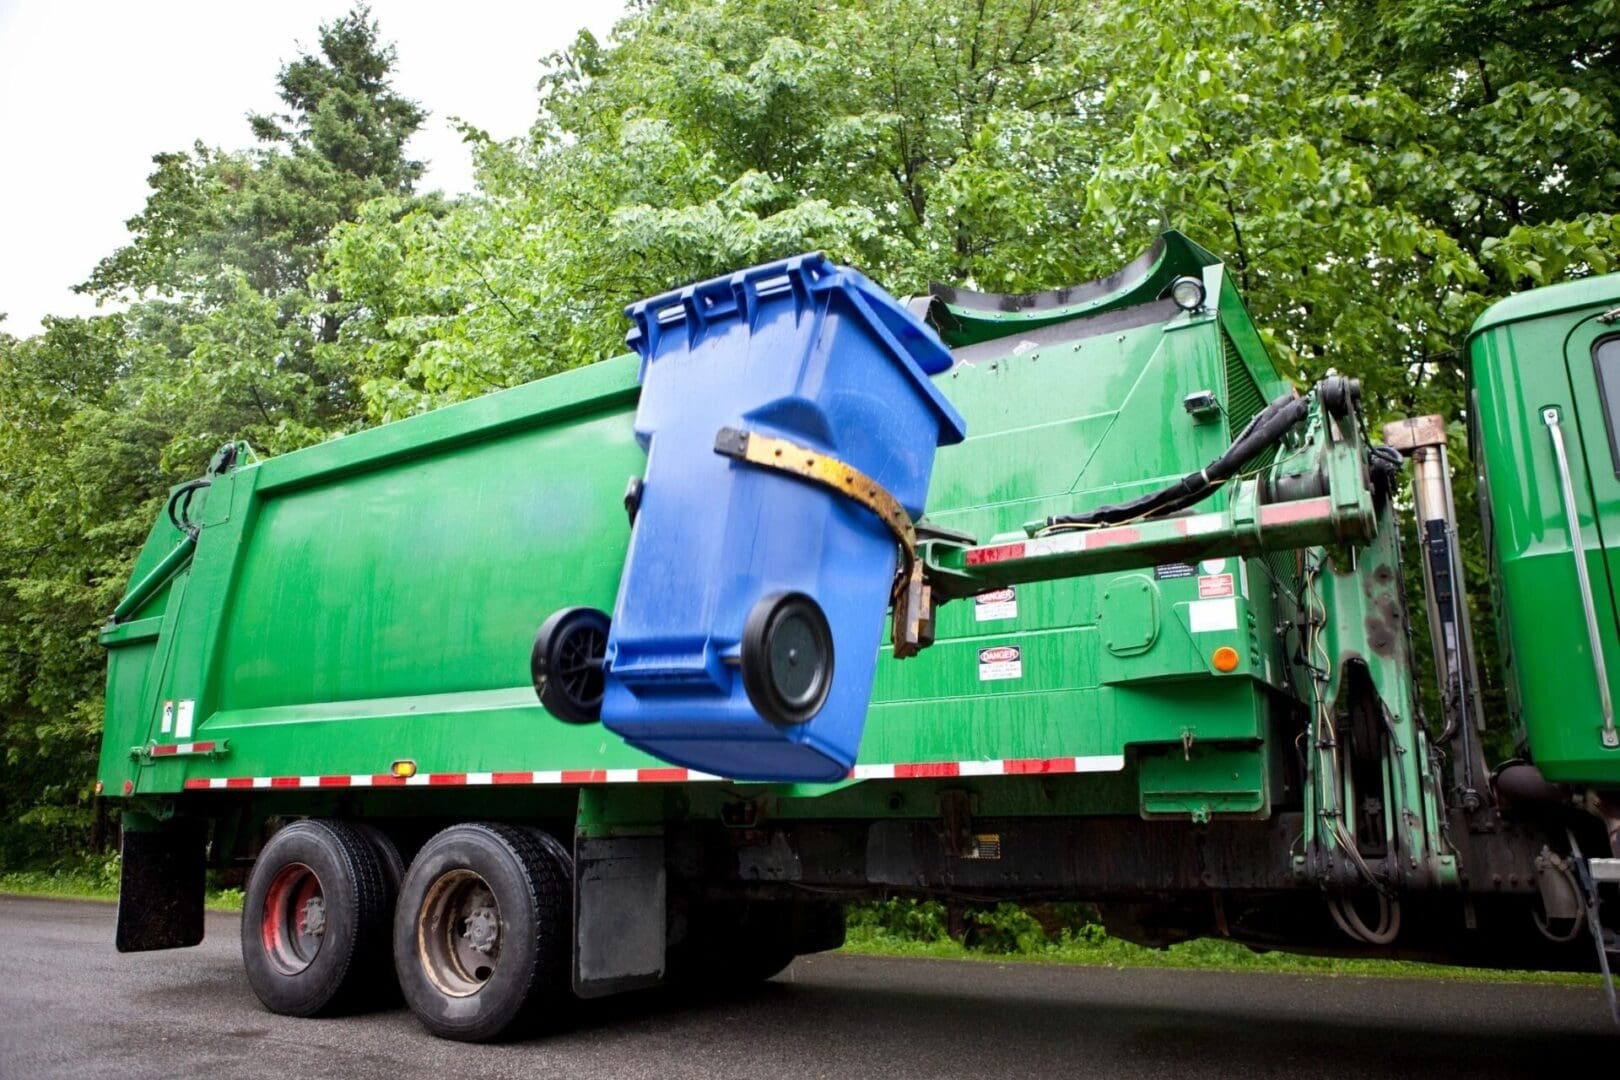 A garbage truck with a blue trash can on the back.